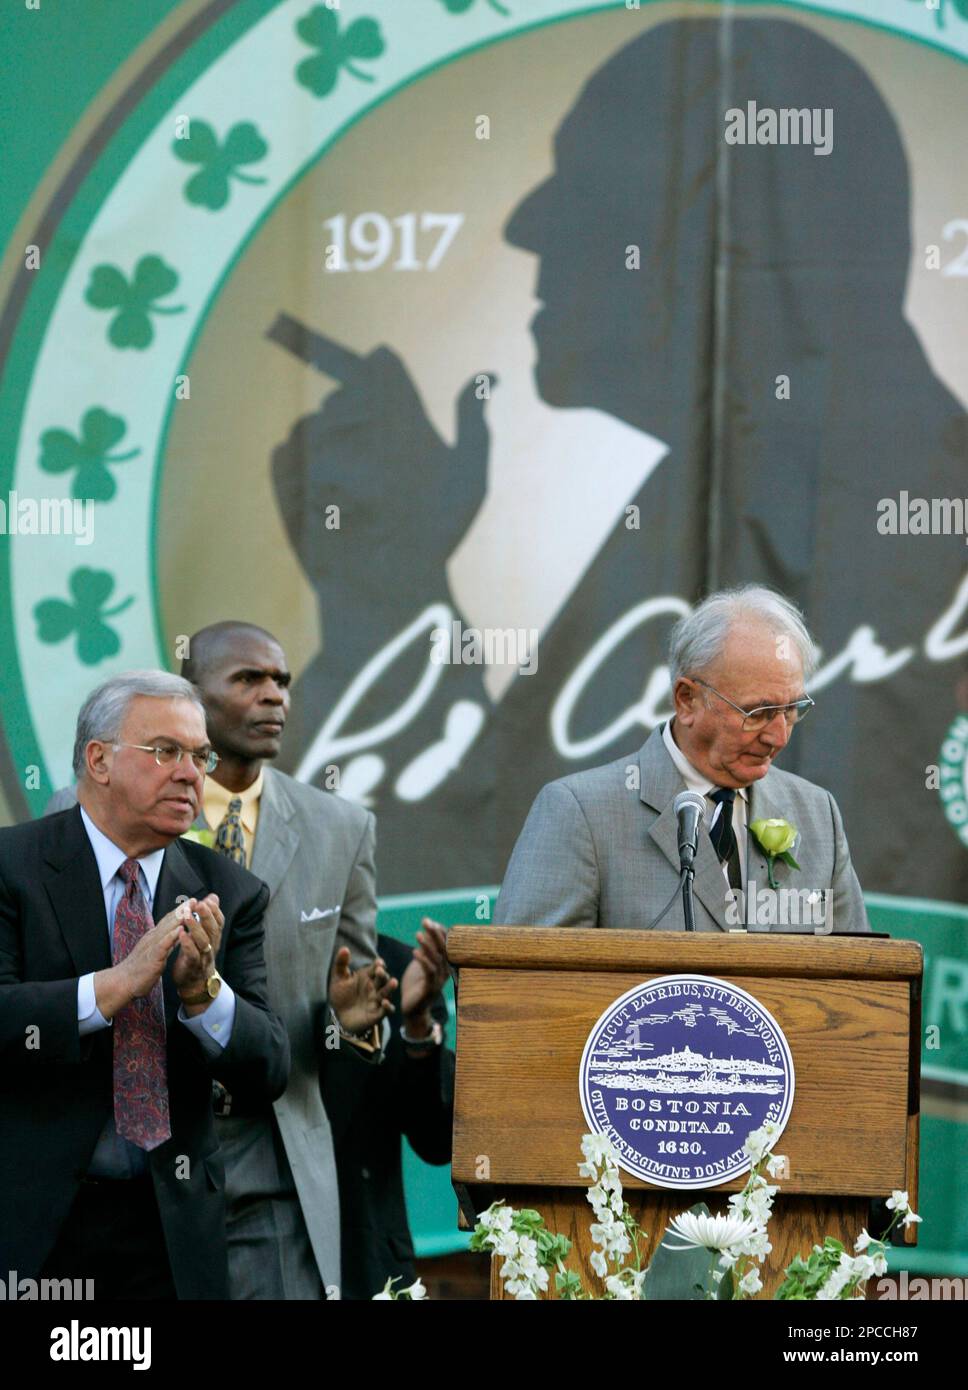 Doc Rivers Wins Red Auerbach Award for Dedication to Celtics 